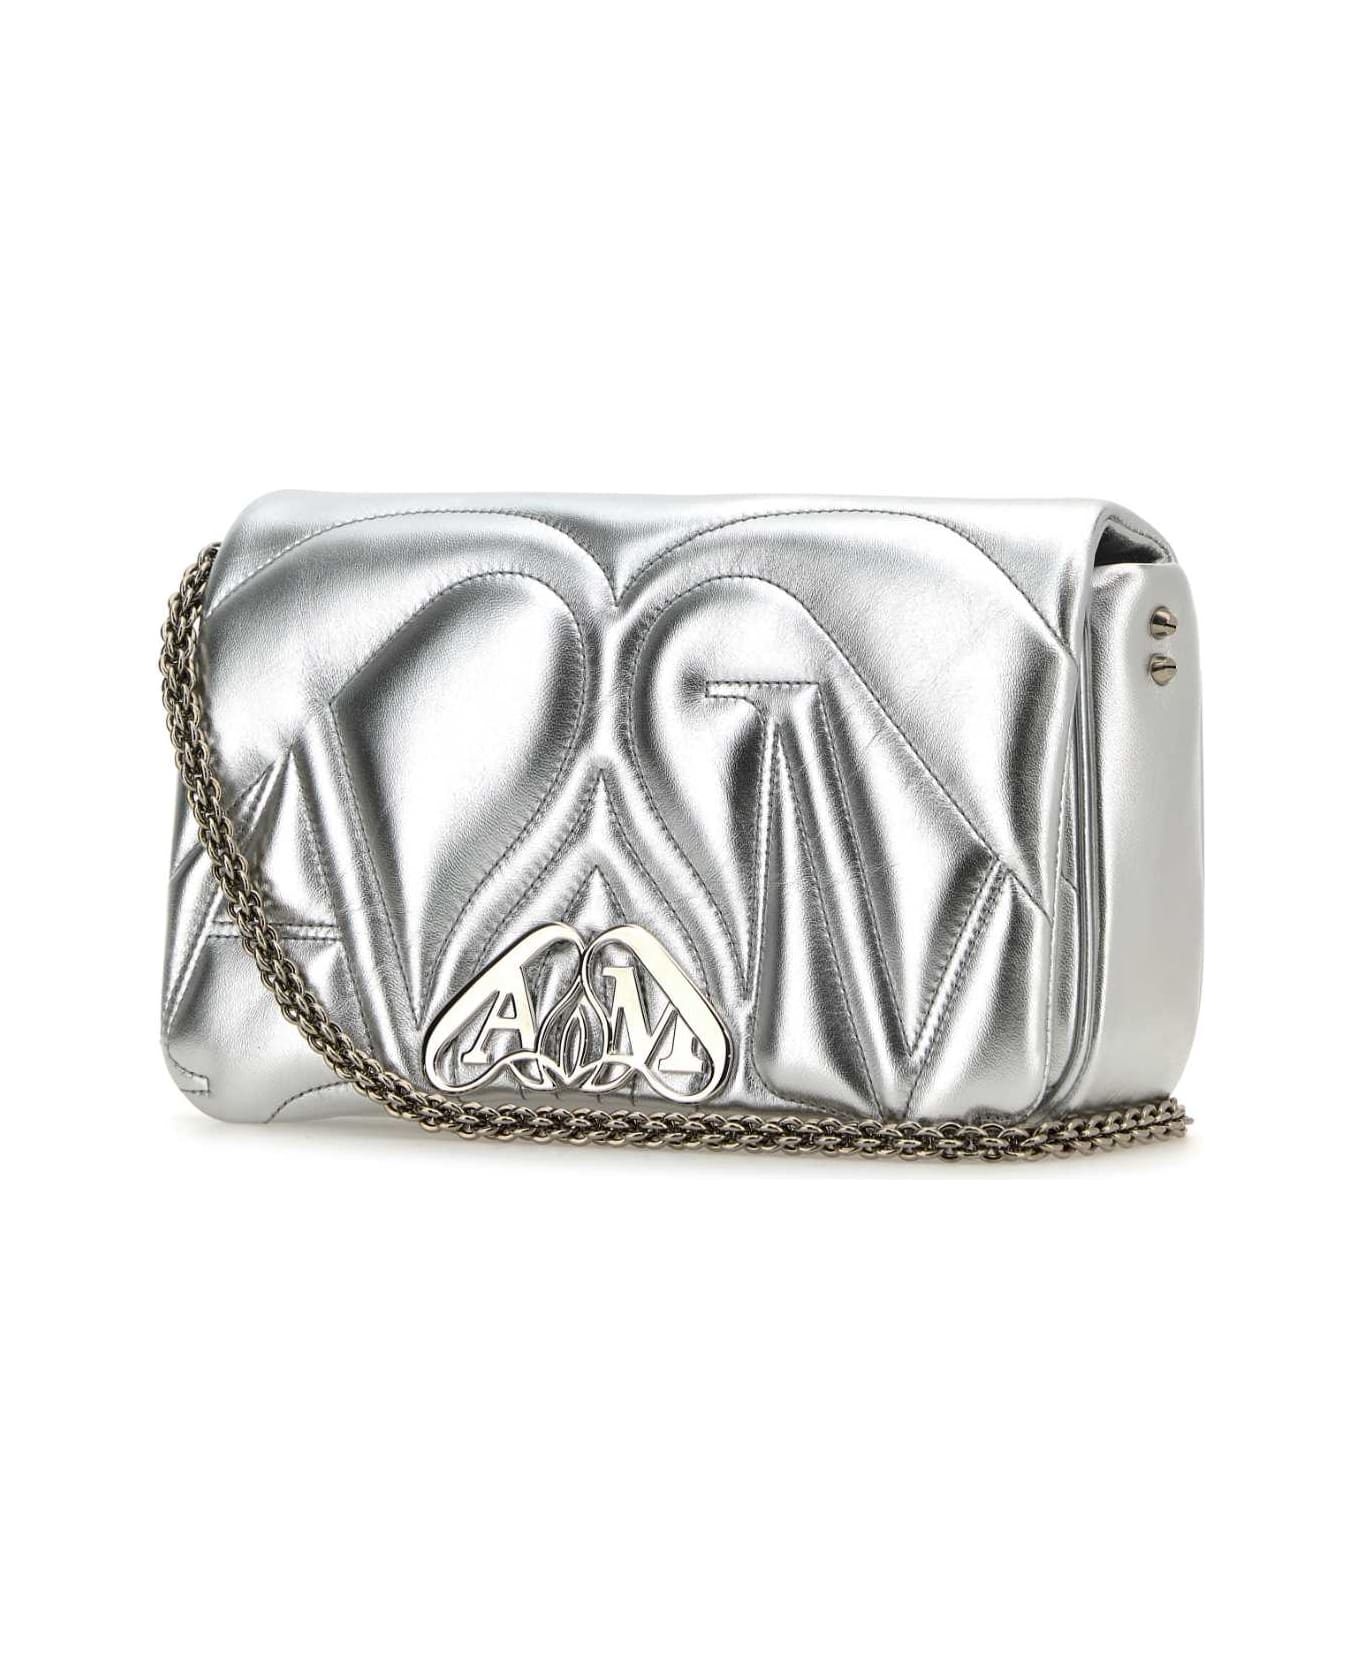 Alexander McQueen Silver Leather Small Seal Shoulder Bag - LIGHTSILVER ショルダーバッグ